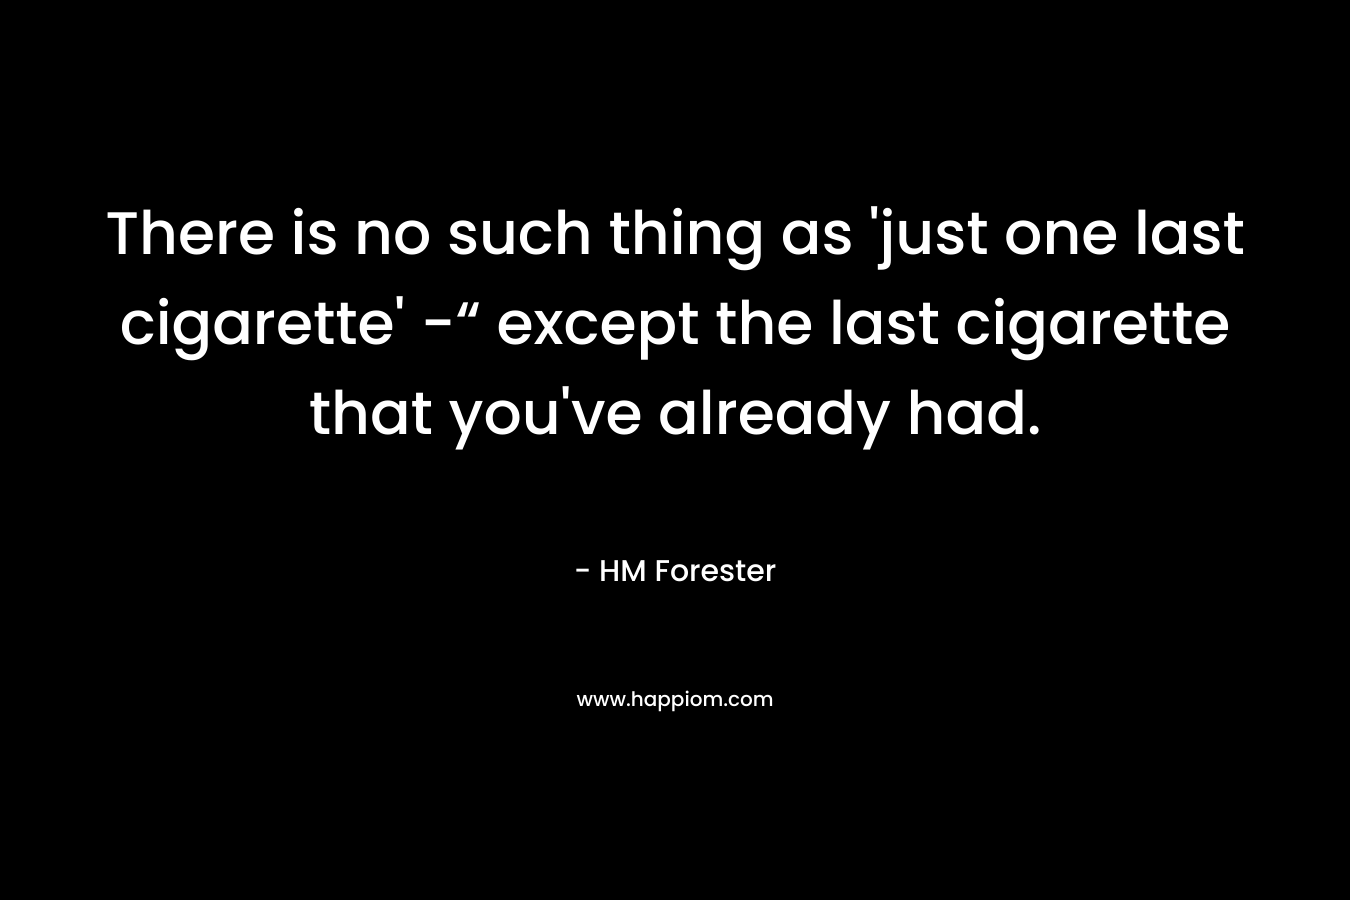 There is no such thing as ‘just one last cigarette’ -“ except the last cigarette that you’ve already had. – HM Forester